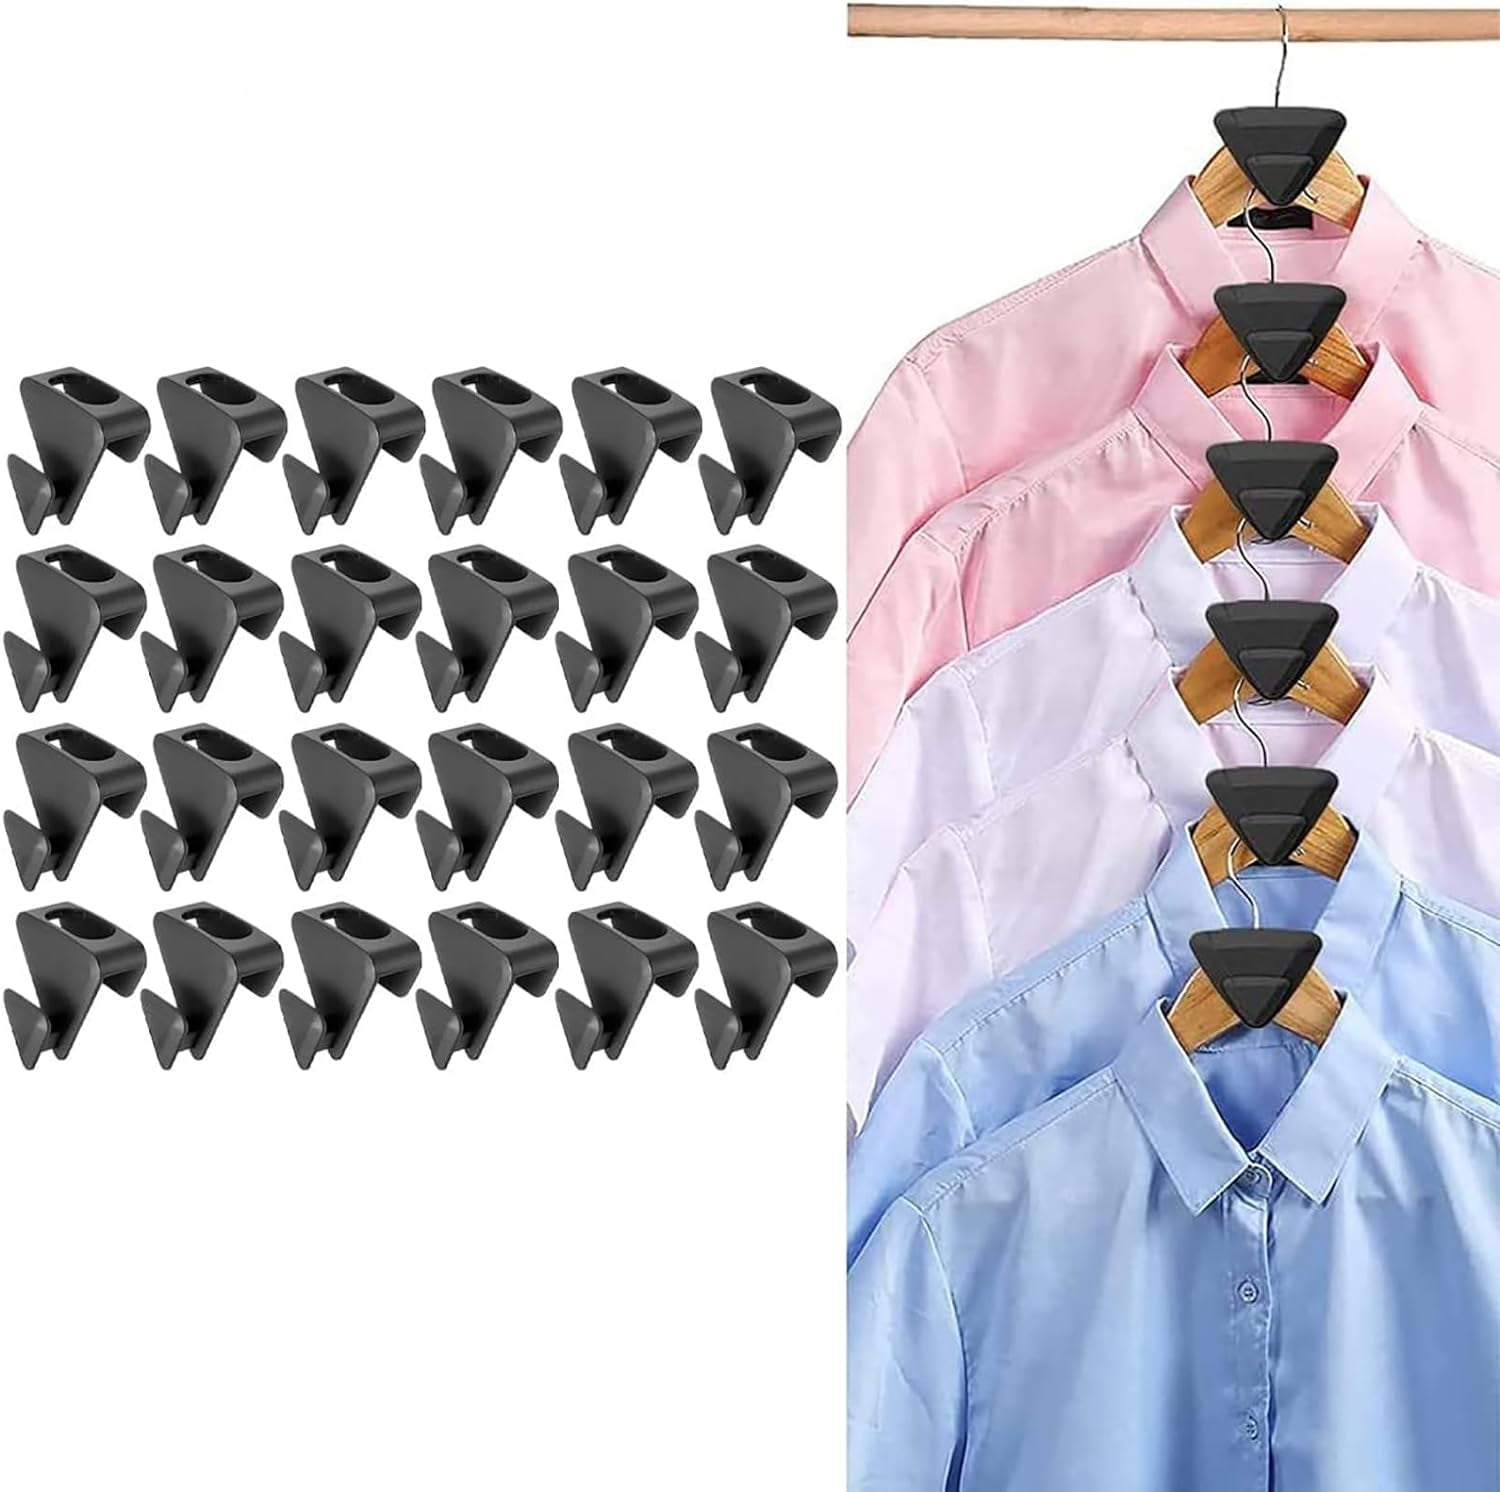  40pcs Space Saving Hangers Hooks, Space Savers Rabbit-Shaped  with Triangles for Hangers, Hangers Space Saving, Hanger Extender for Heavy  Duty Cascading Connection Hook, Clothes Hanger Connector Hooks : Home &  Kitchen